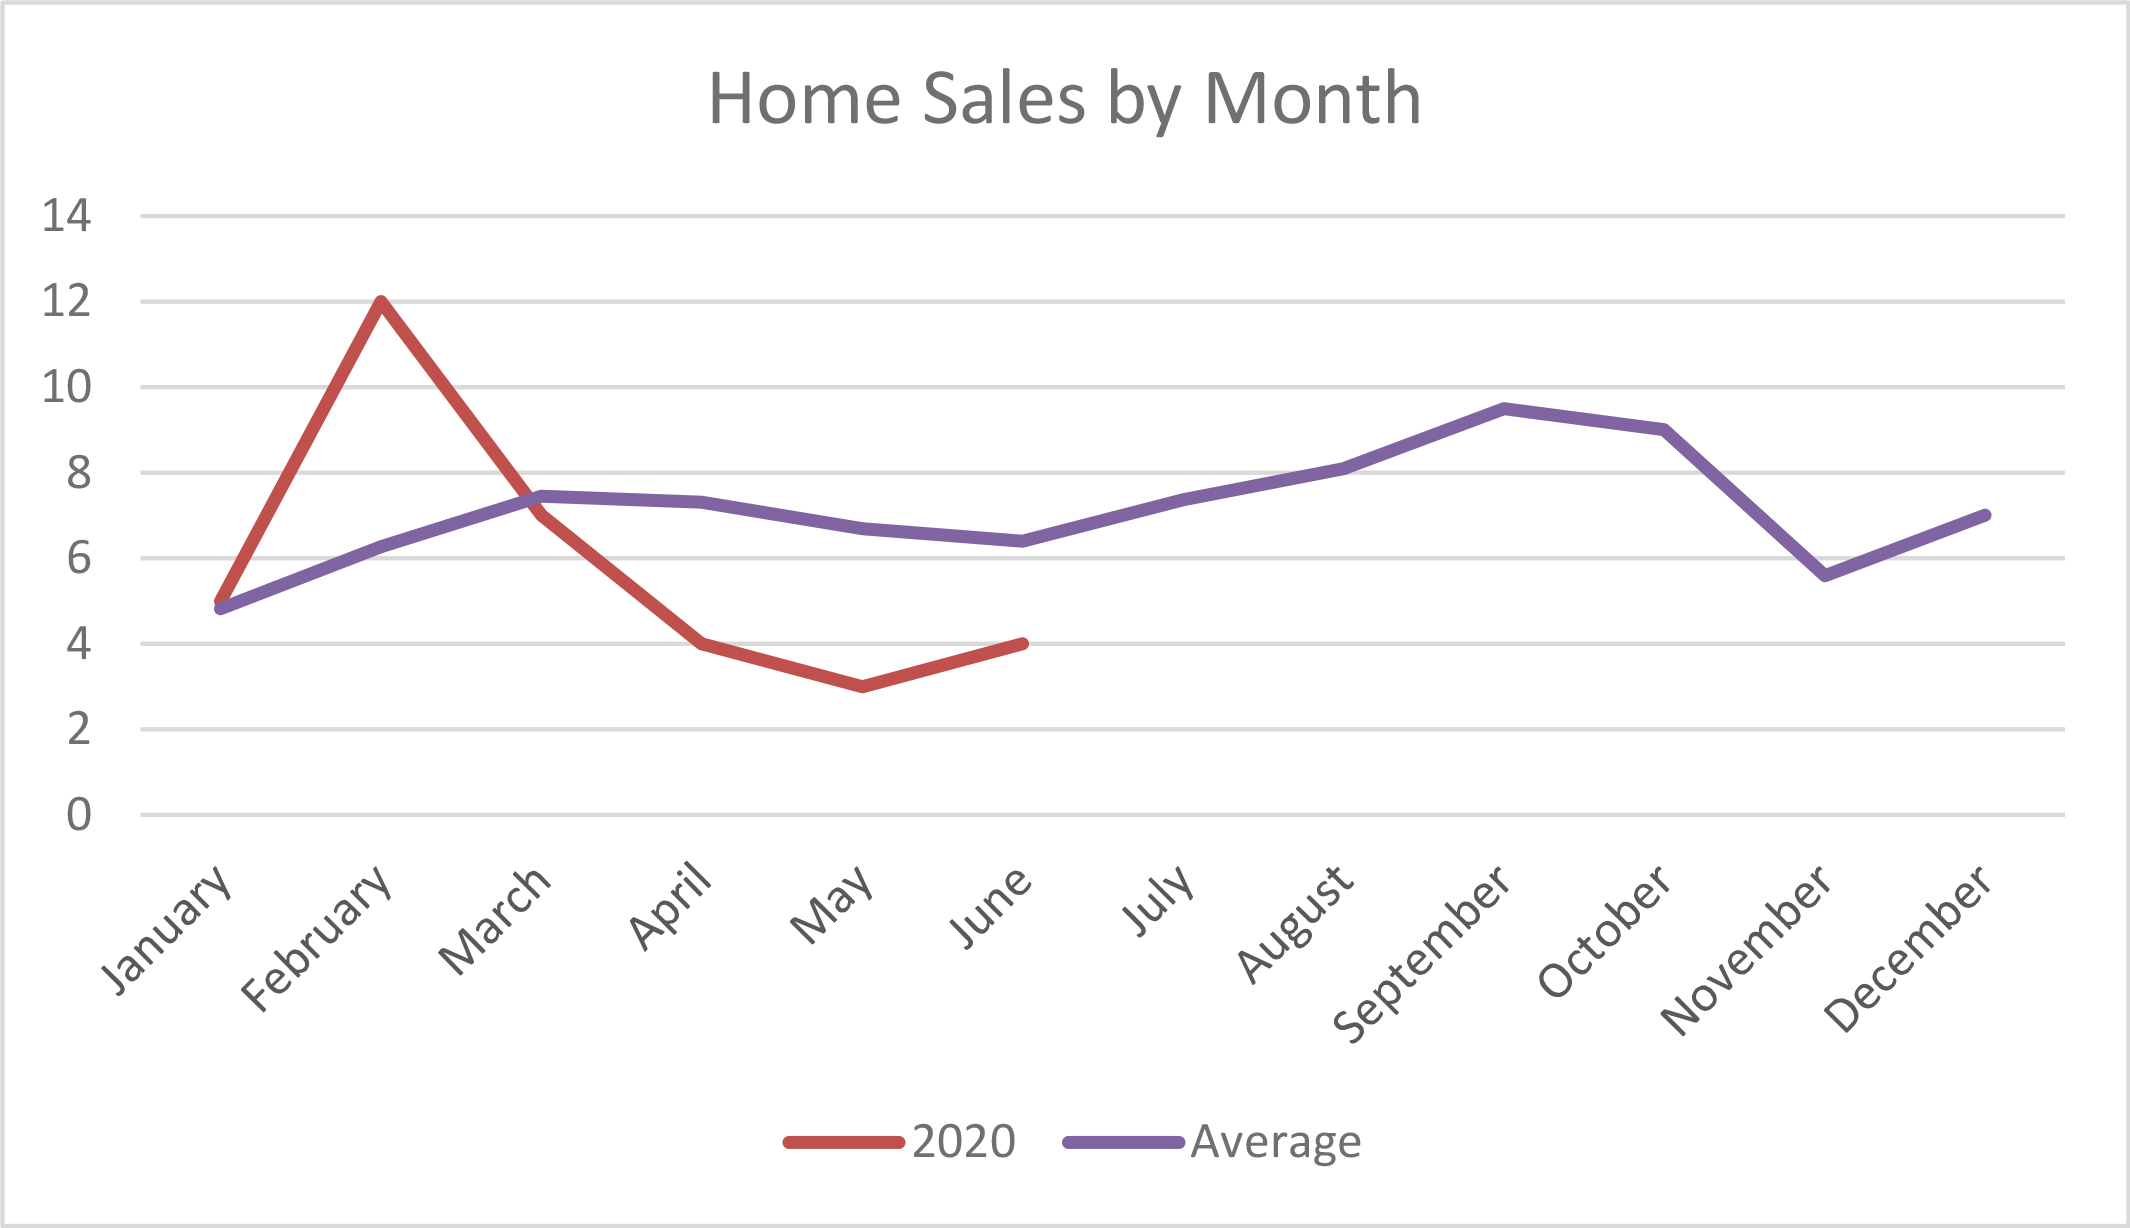 Home sales activity by month